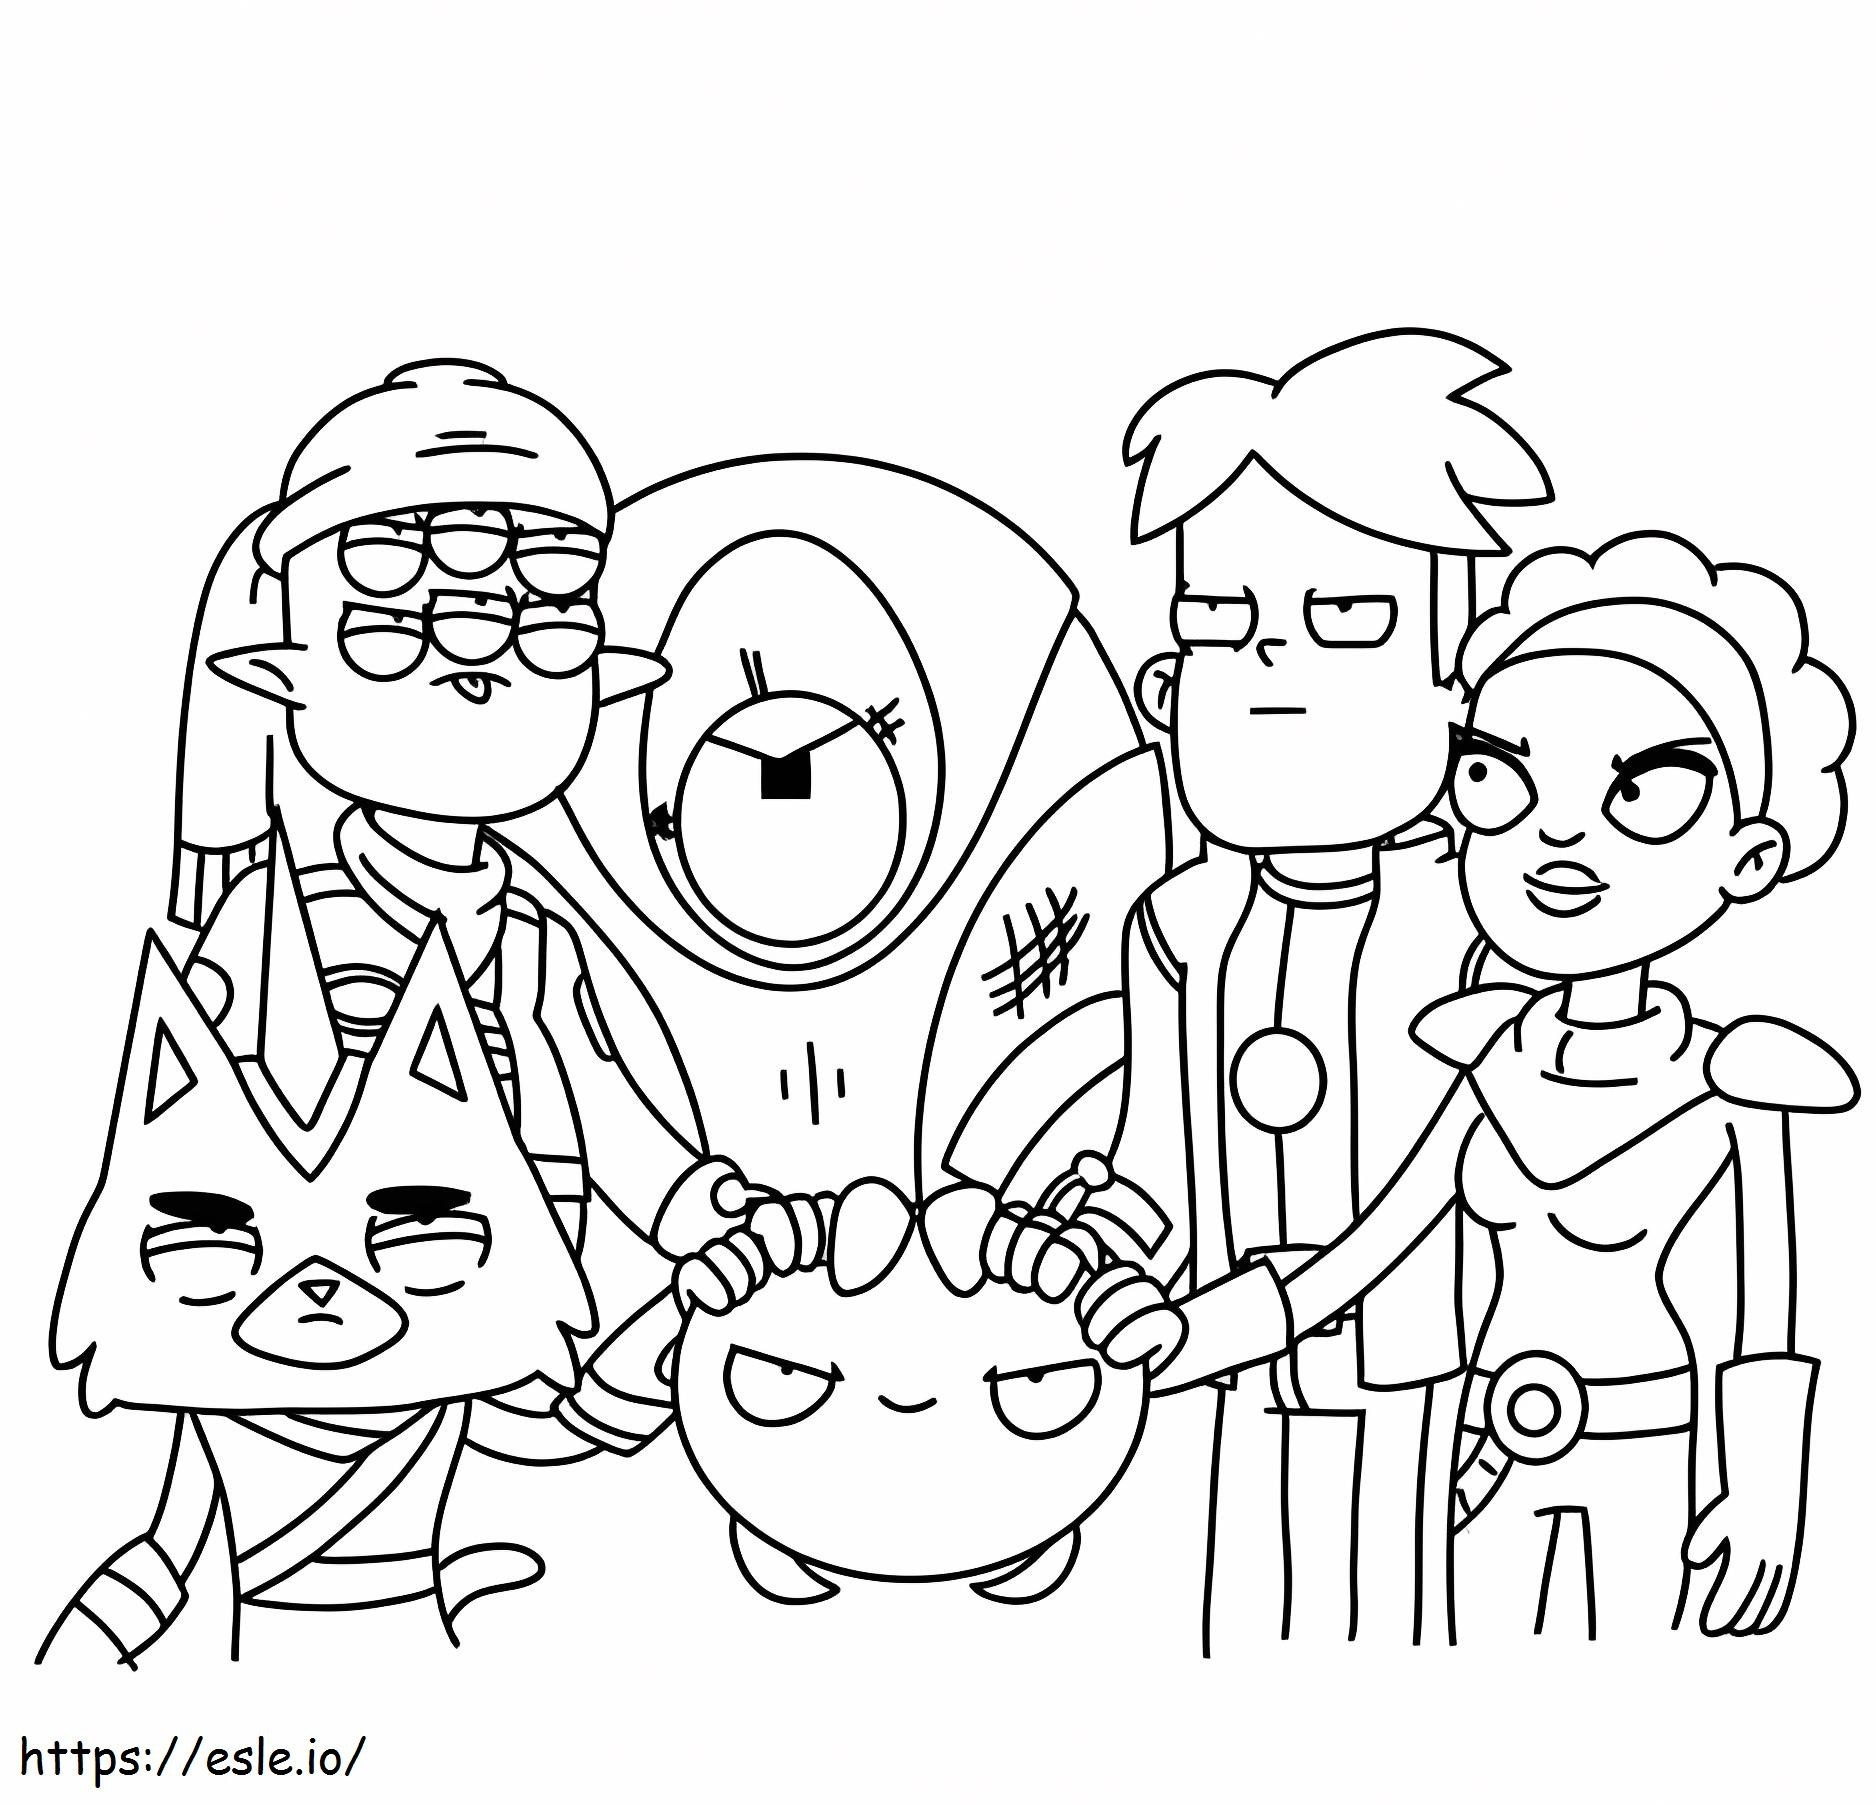 Printable Final Space coloring page